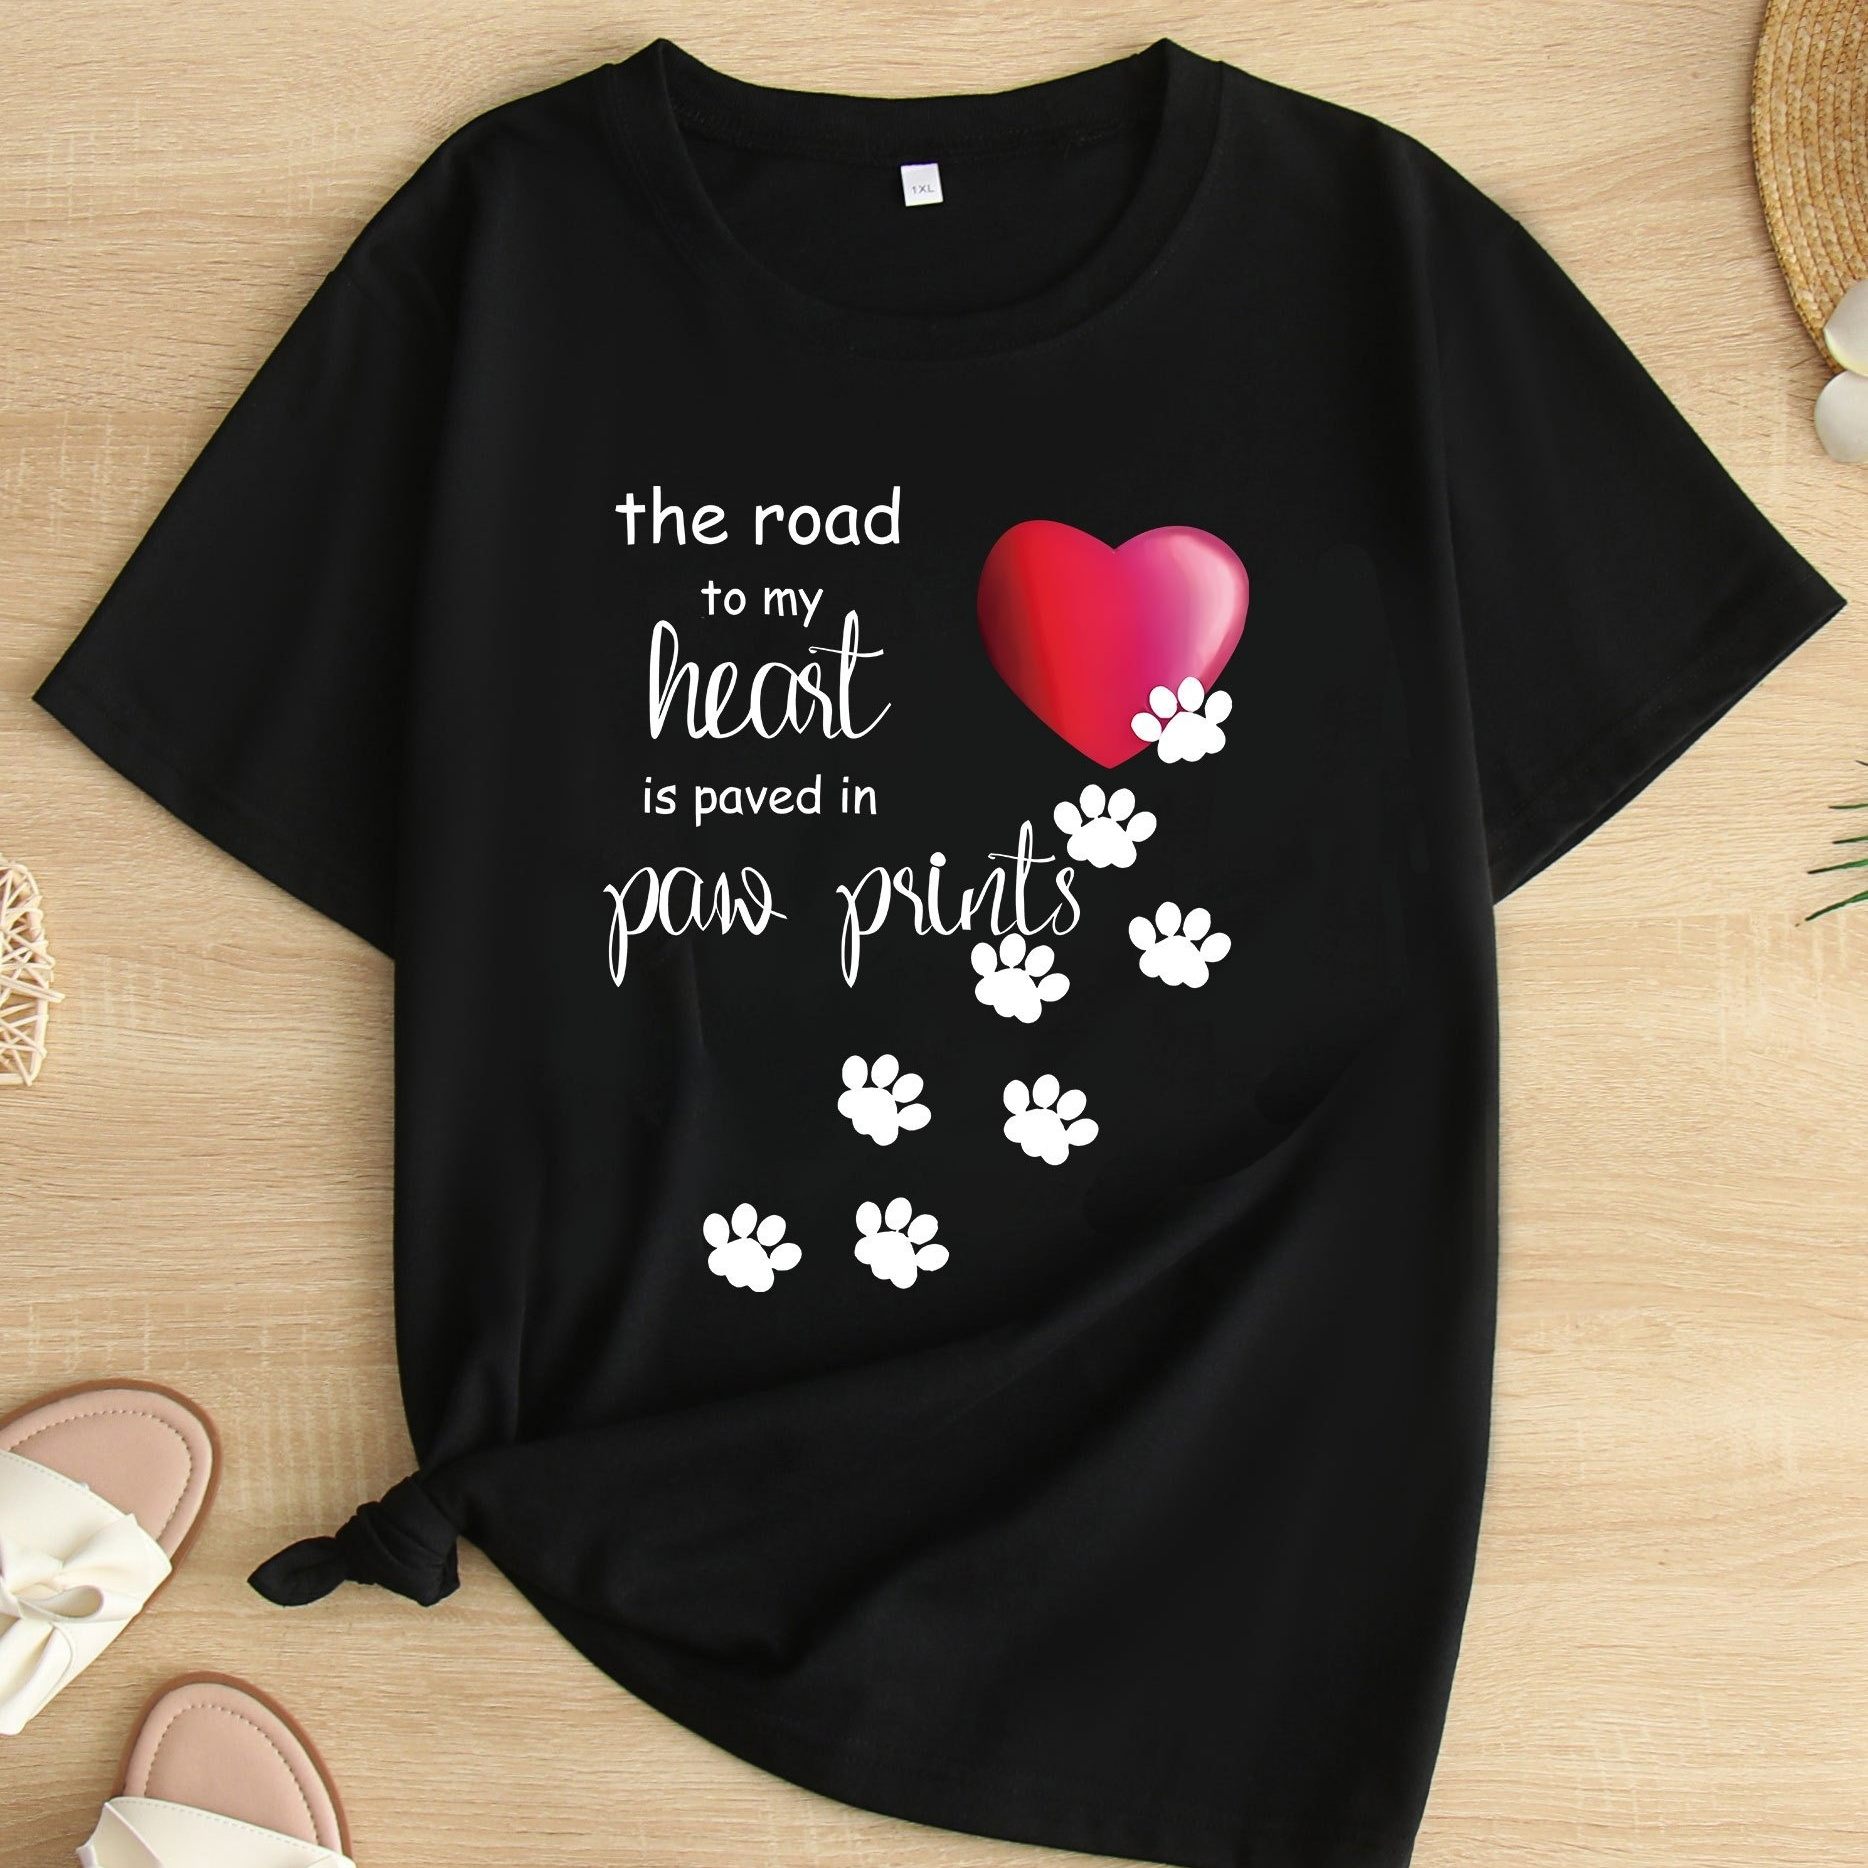 

Plus Size Heart & Paw Print T-shirt, Casual Short Sleeve Crew Neck Top For Spring & Summer, Women's Plus Size Clothing